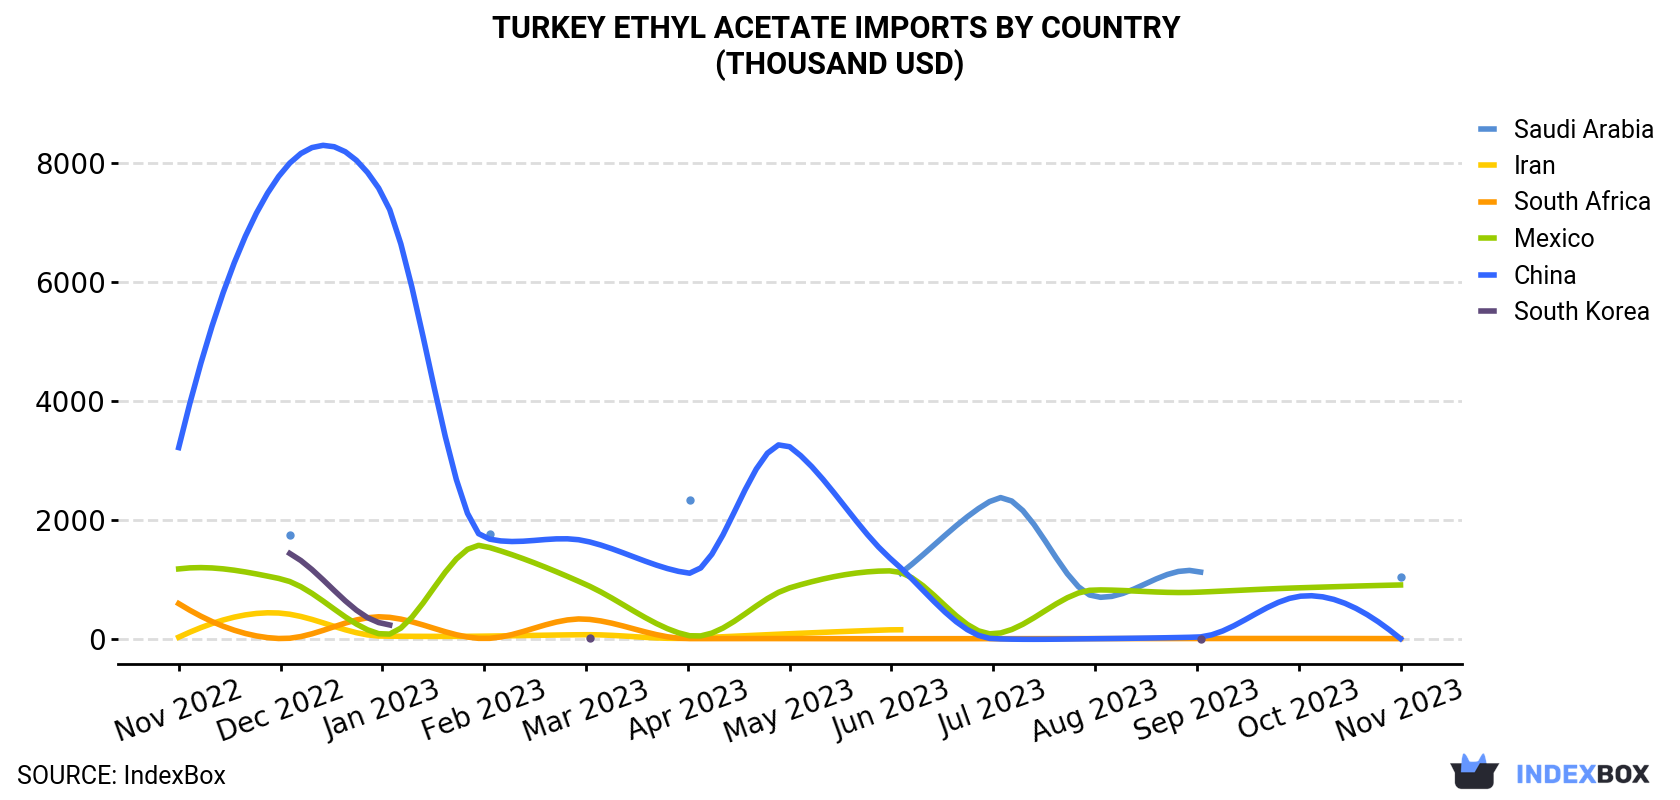 Turkey Ethyl Acetate Imports By Country (Thousand USD)